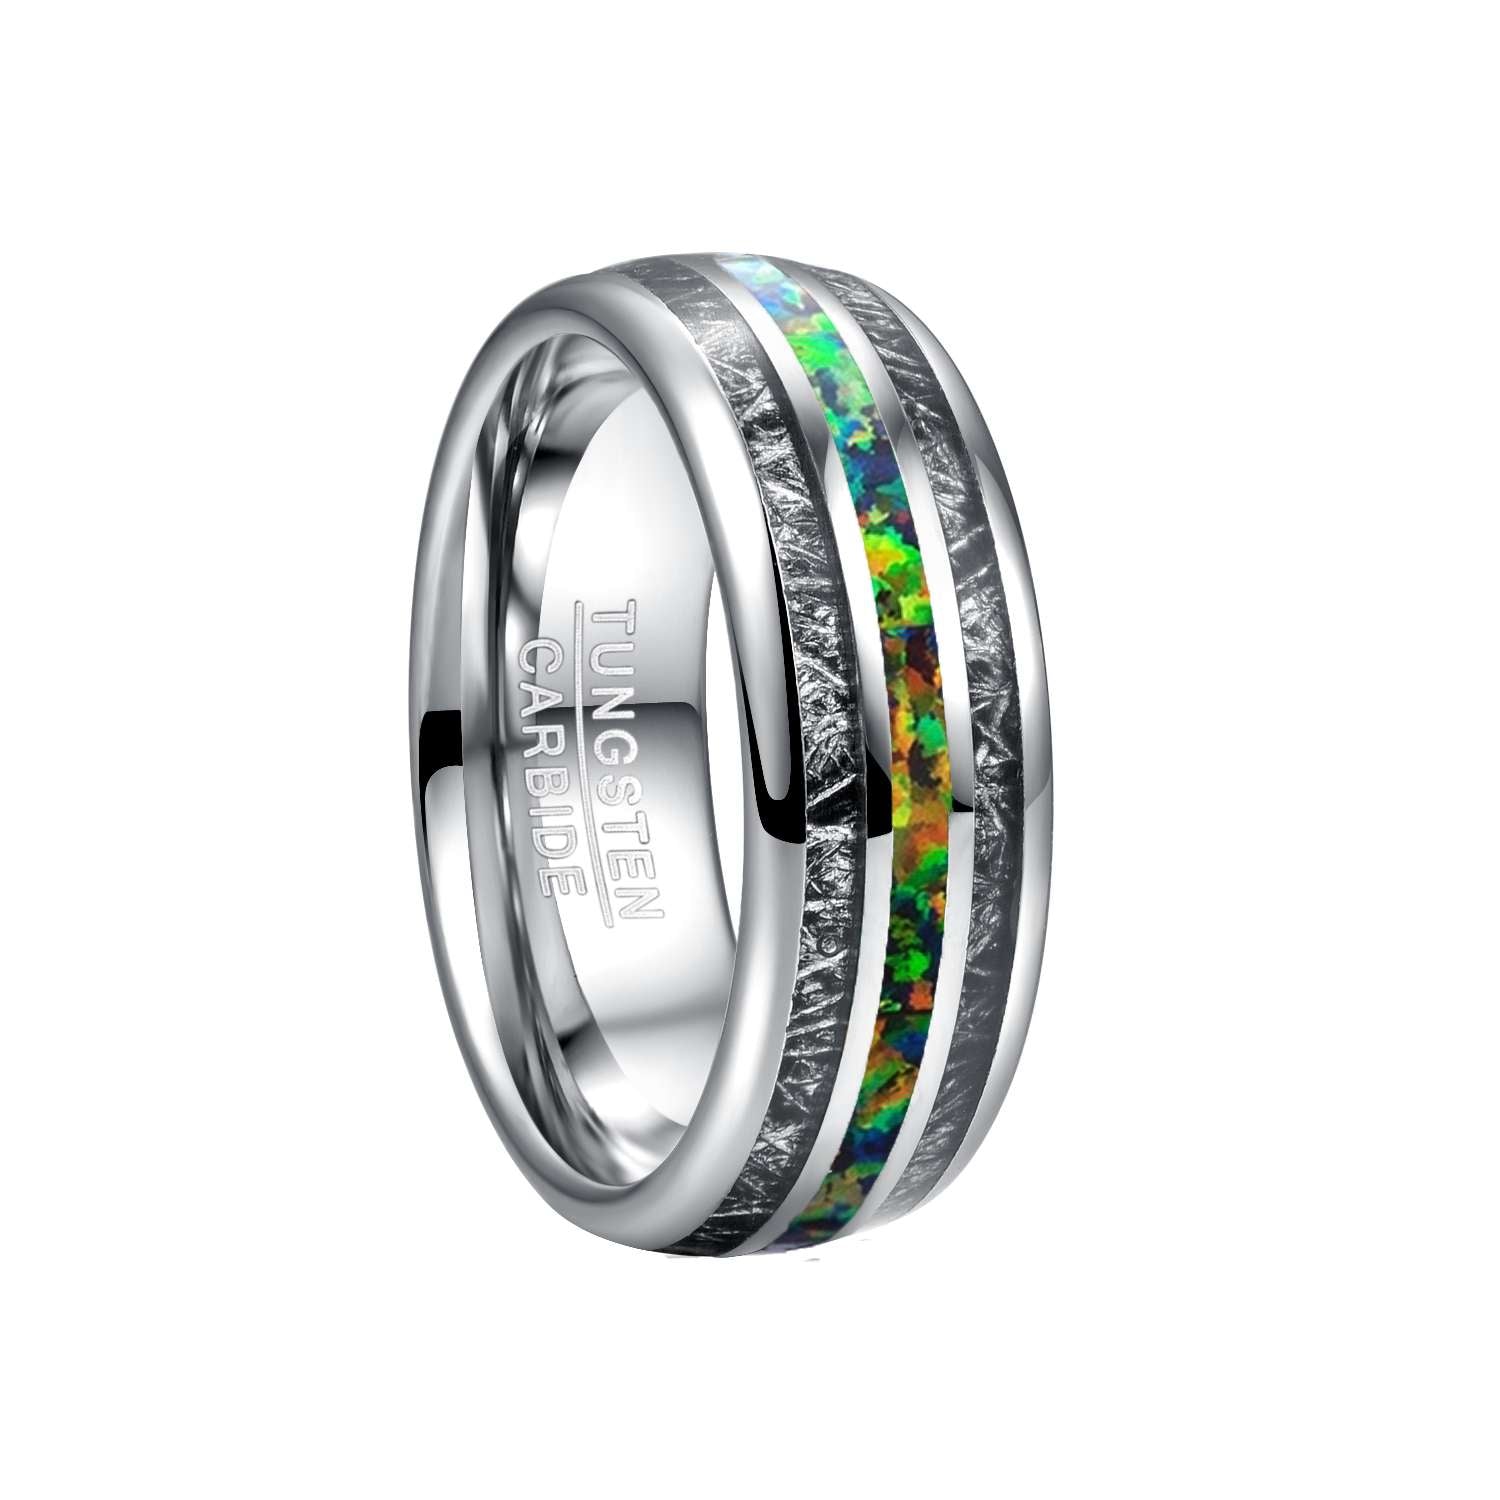 Ginnungagap Fire and Ice 8mm Tungsten Carbide Ring with Black meteorite and Green Opal Stone